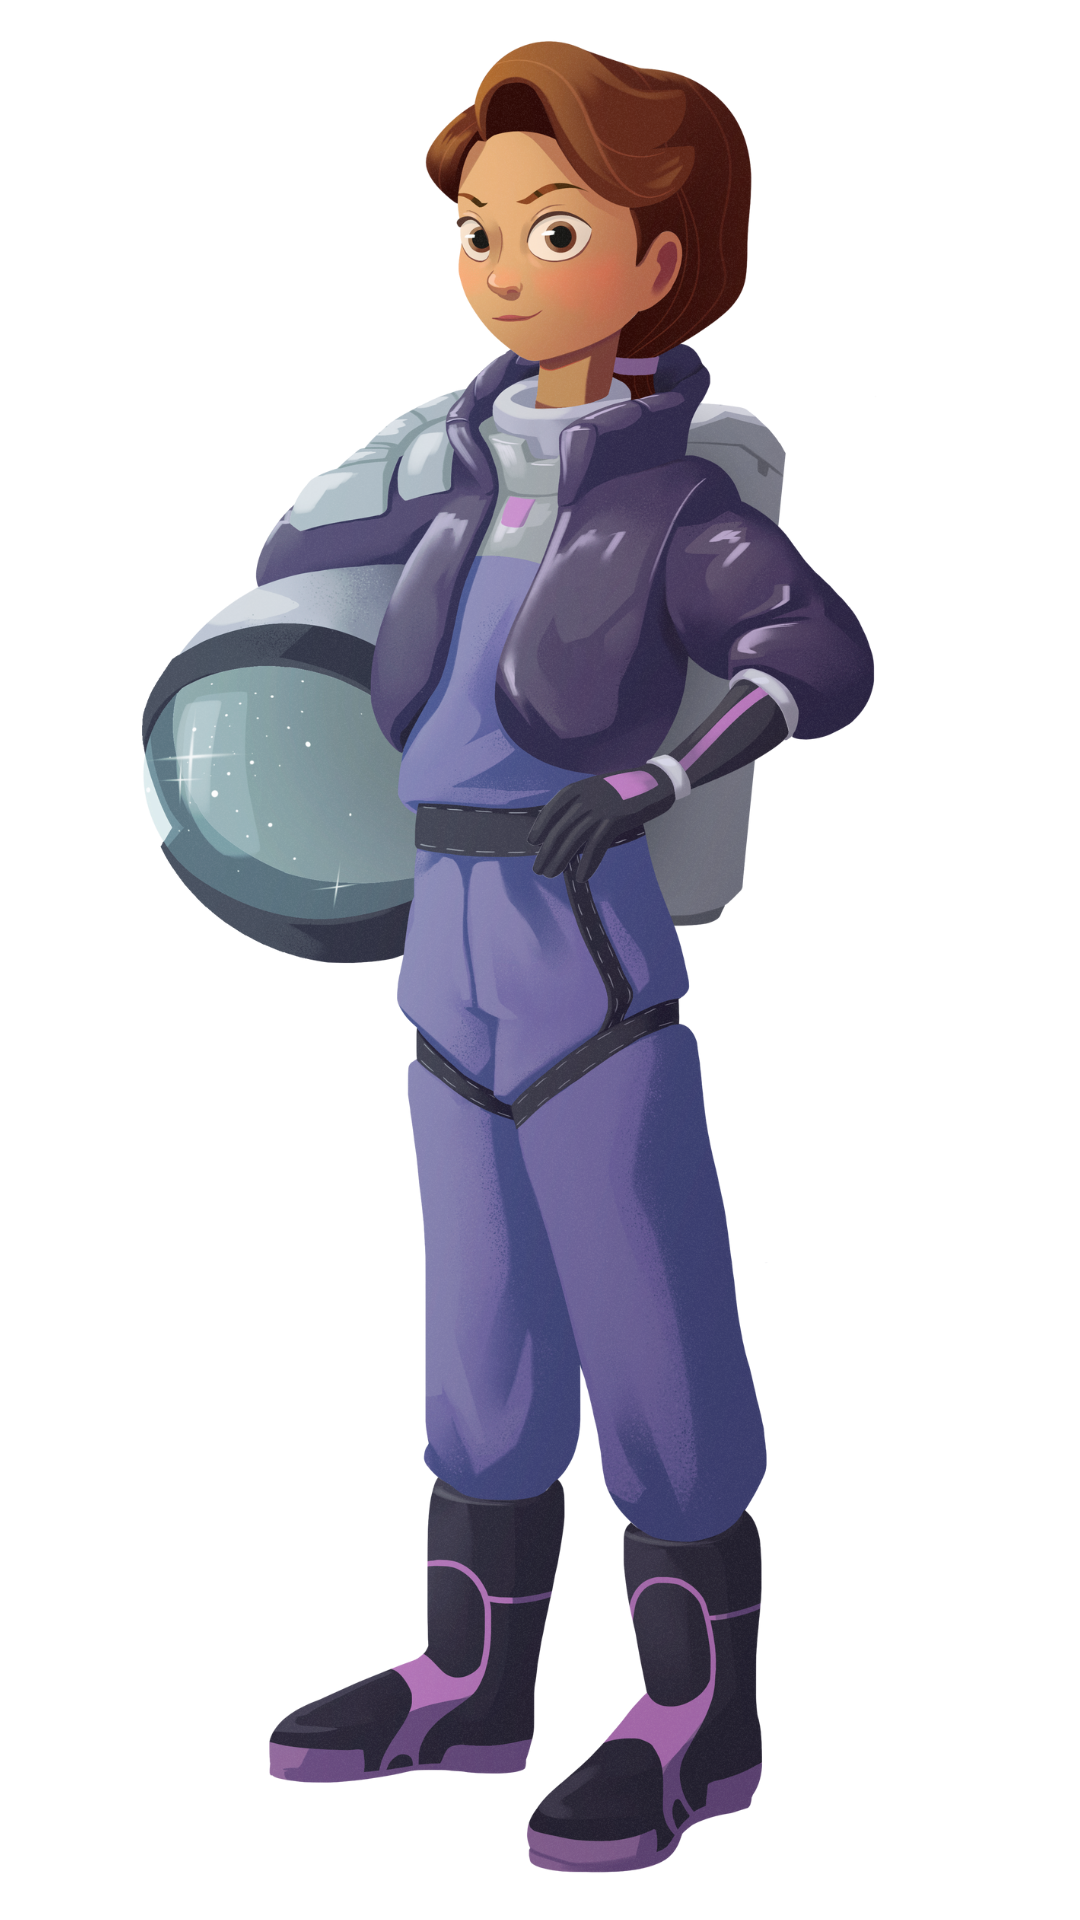 A young girl with brown wavy hair and a purple astronaut suit smiles as Erandi, Erandi Aprende's friendly AI STEAM buddy, sparks curiosity about science, technology and beyond.